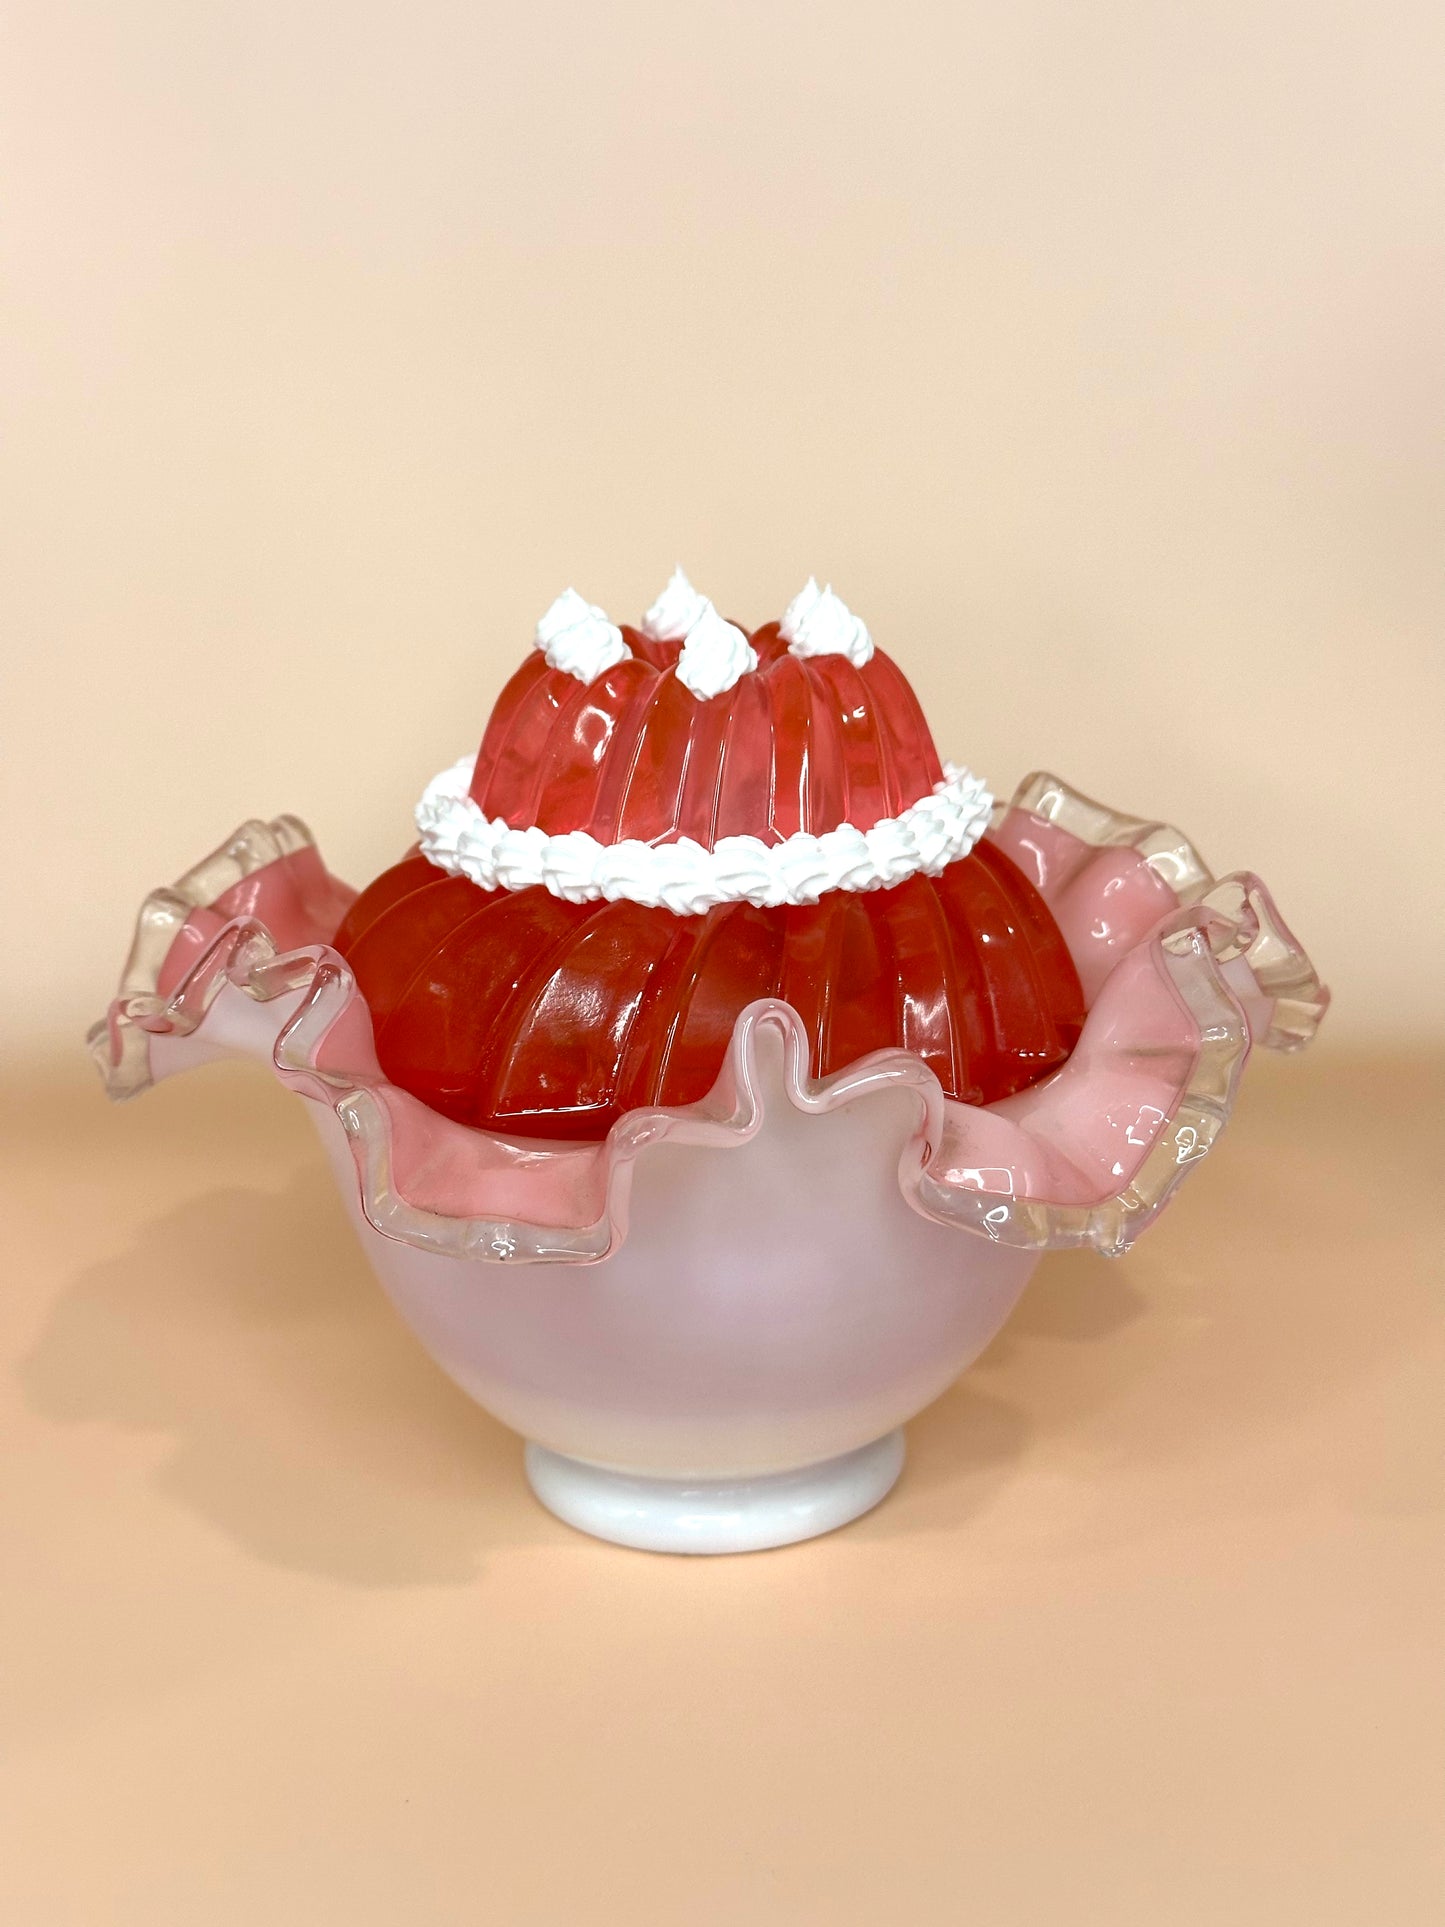 Vintage Pink Frilly Glass Dish with Red Jello Mold and Whip Cream